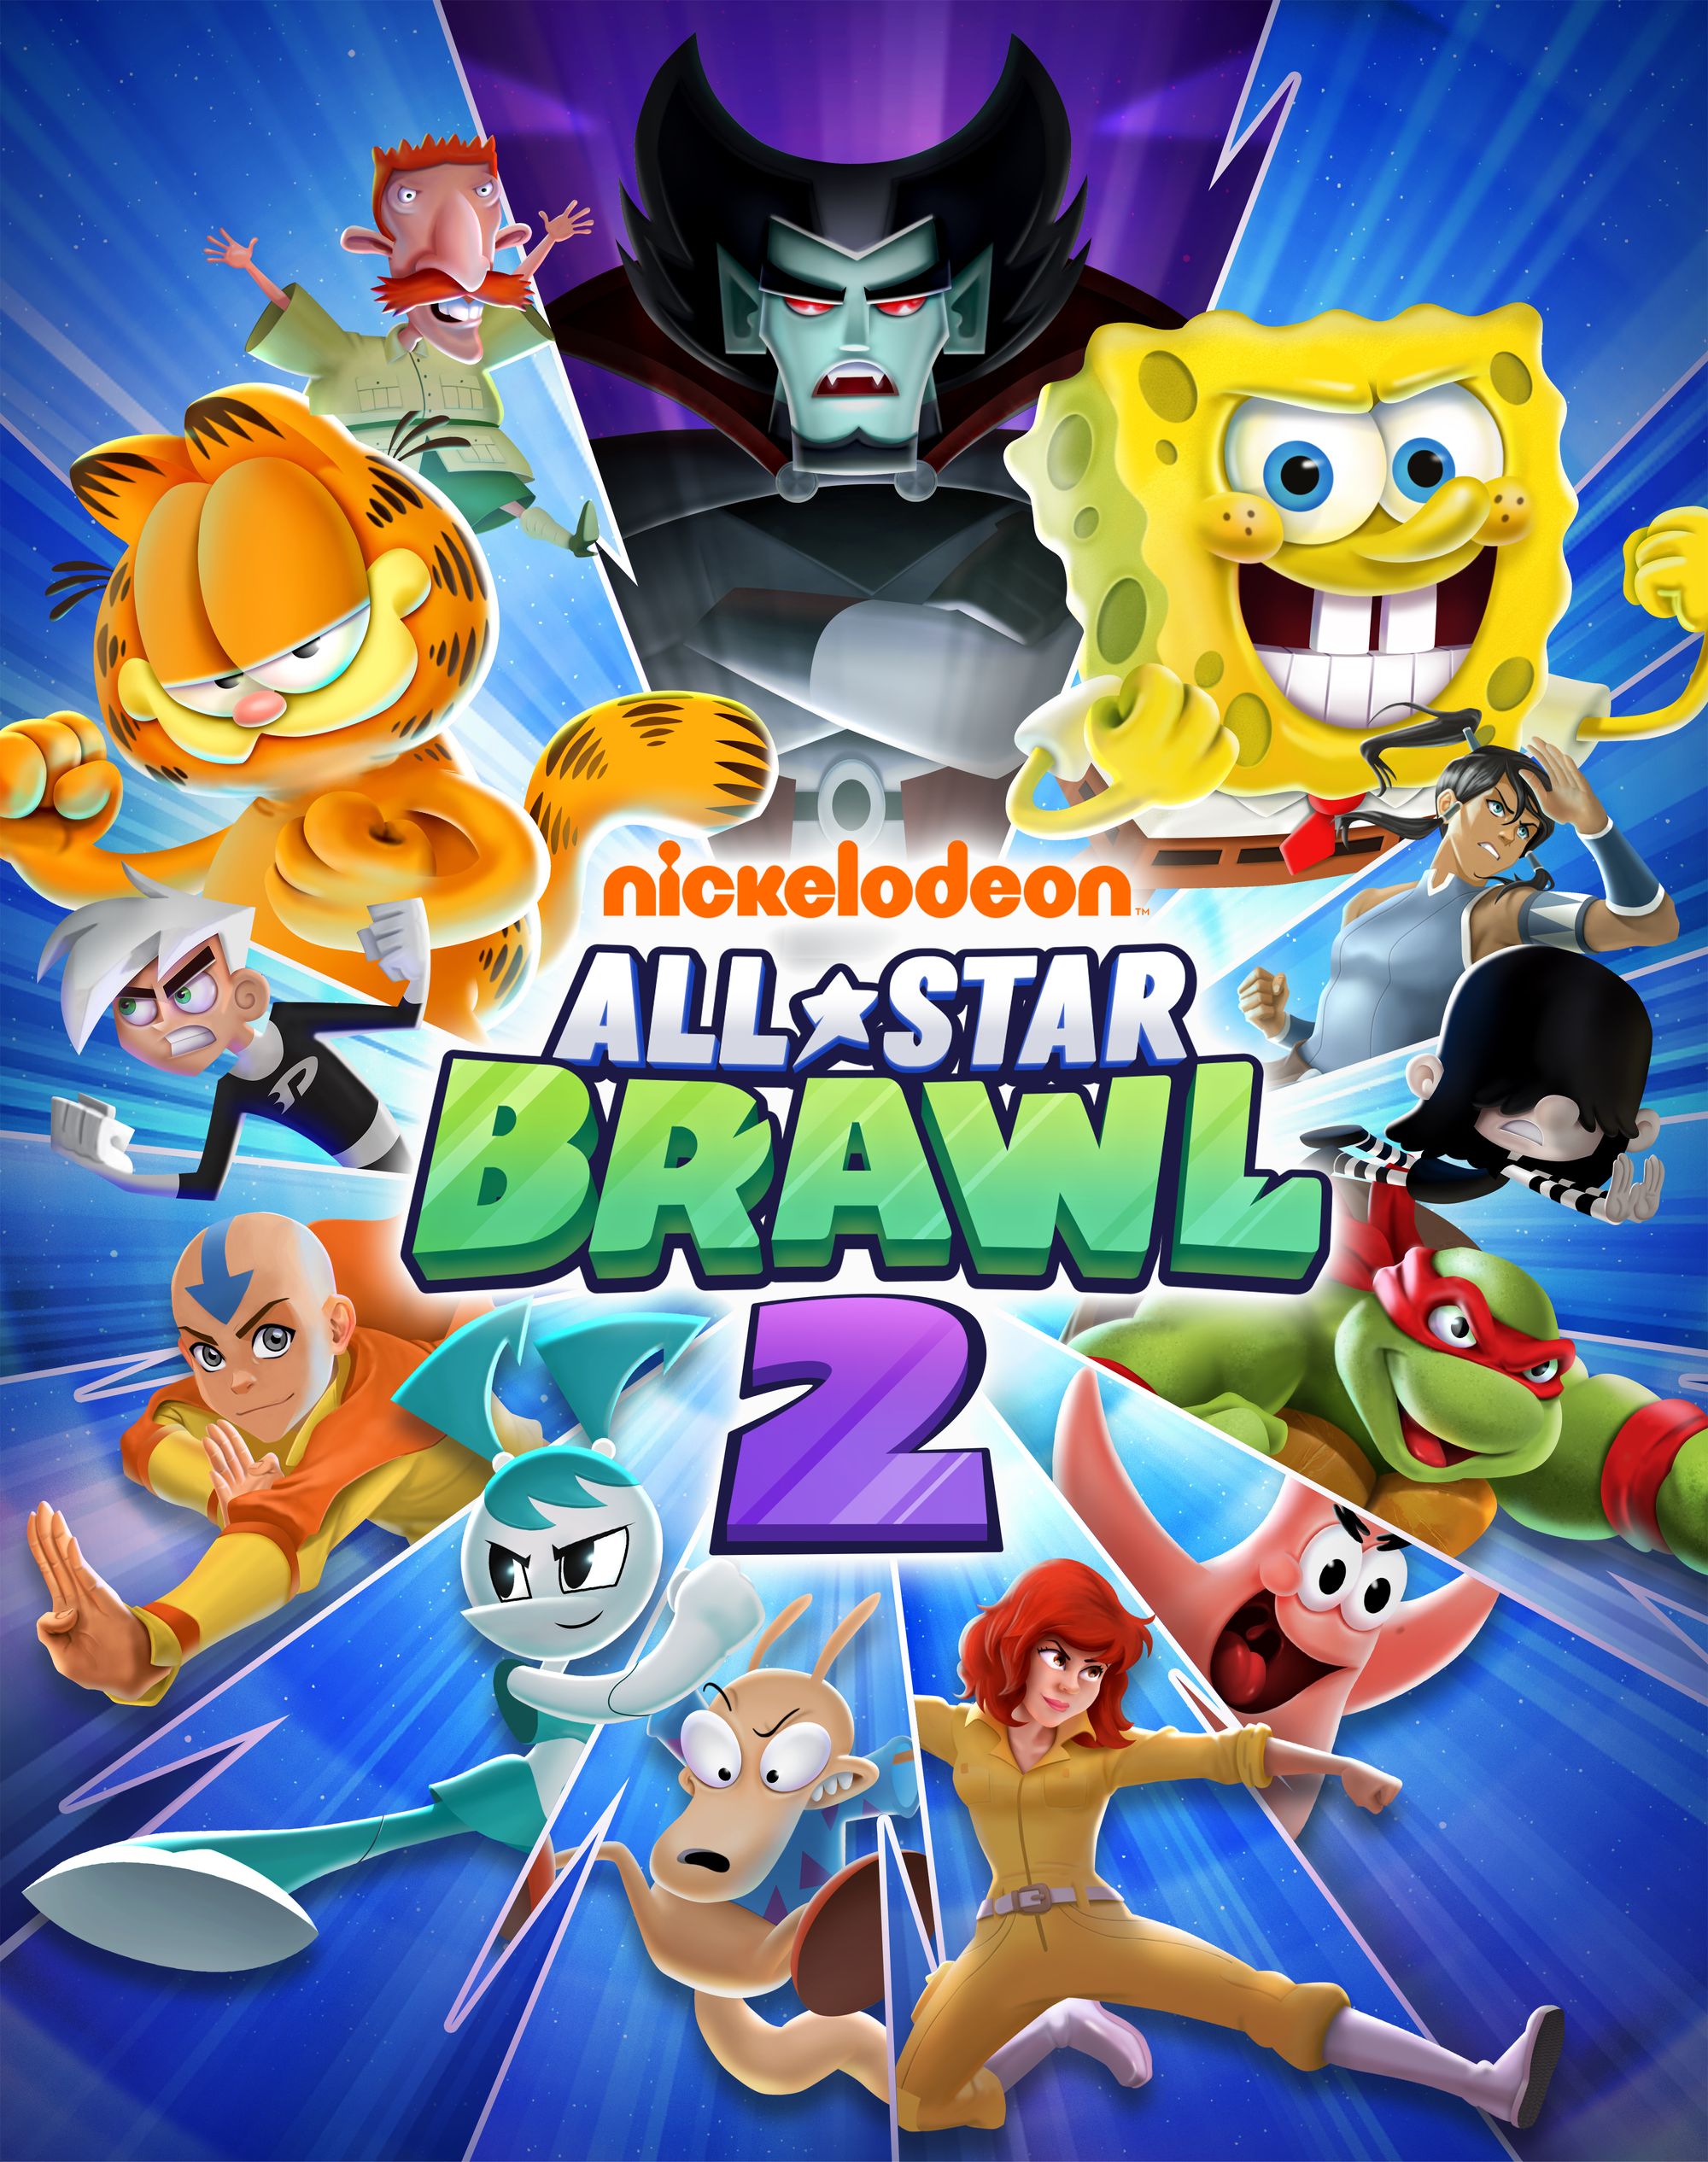 Nickelodeon All-Star Brawl 2 Hits Consoles and PC